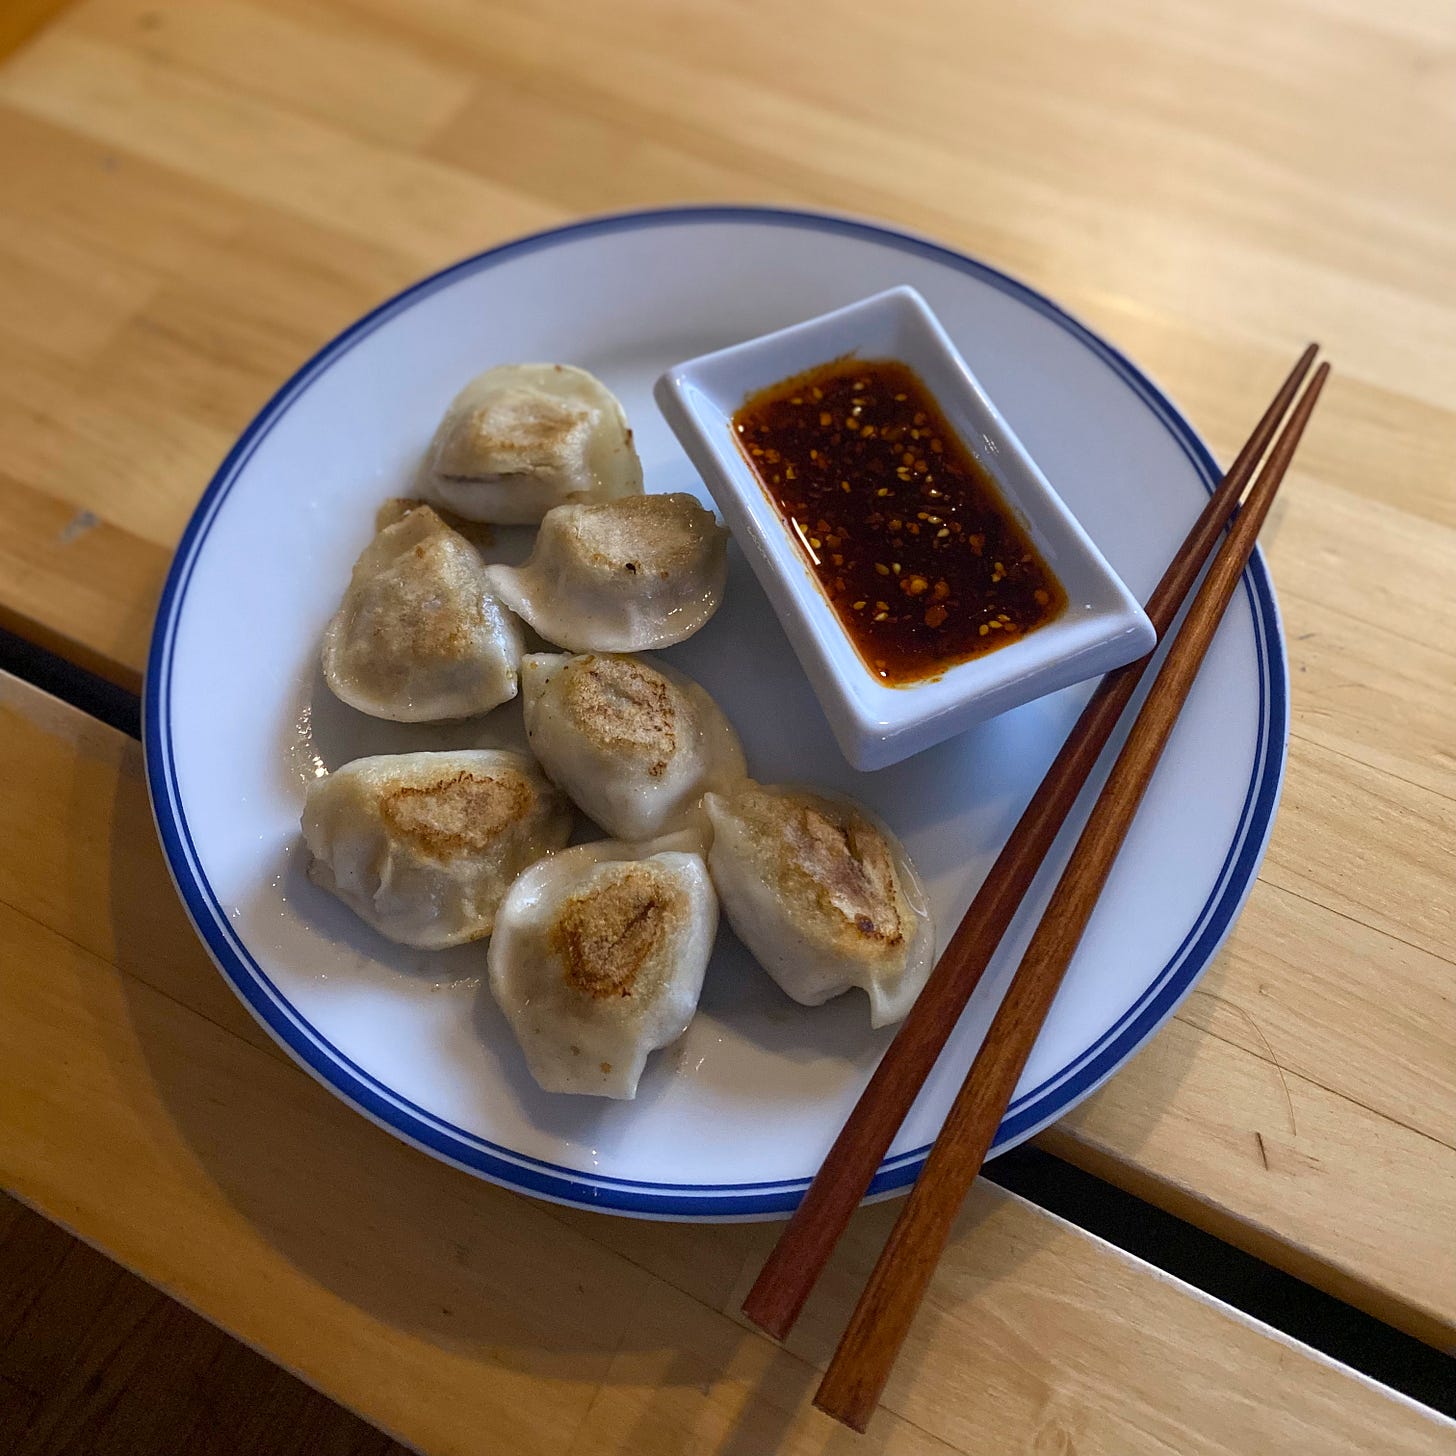 A white plate with a blue rim holding seven half-moon shaped dumplings next to a white rectangular ramekin of dumpling sauce mixed with chili oil. Wooden chopsticks rest at the edge of the plate.